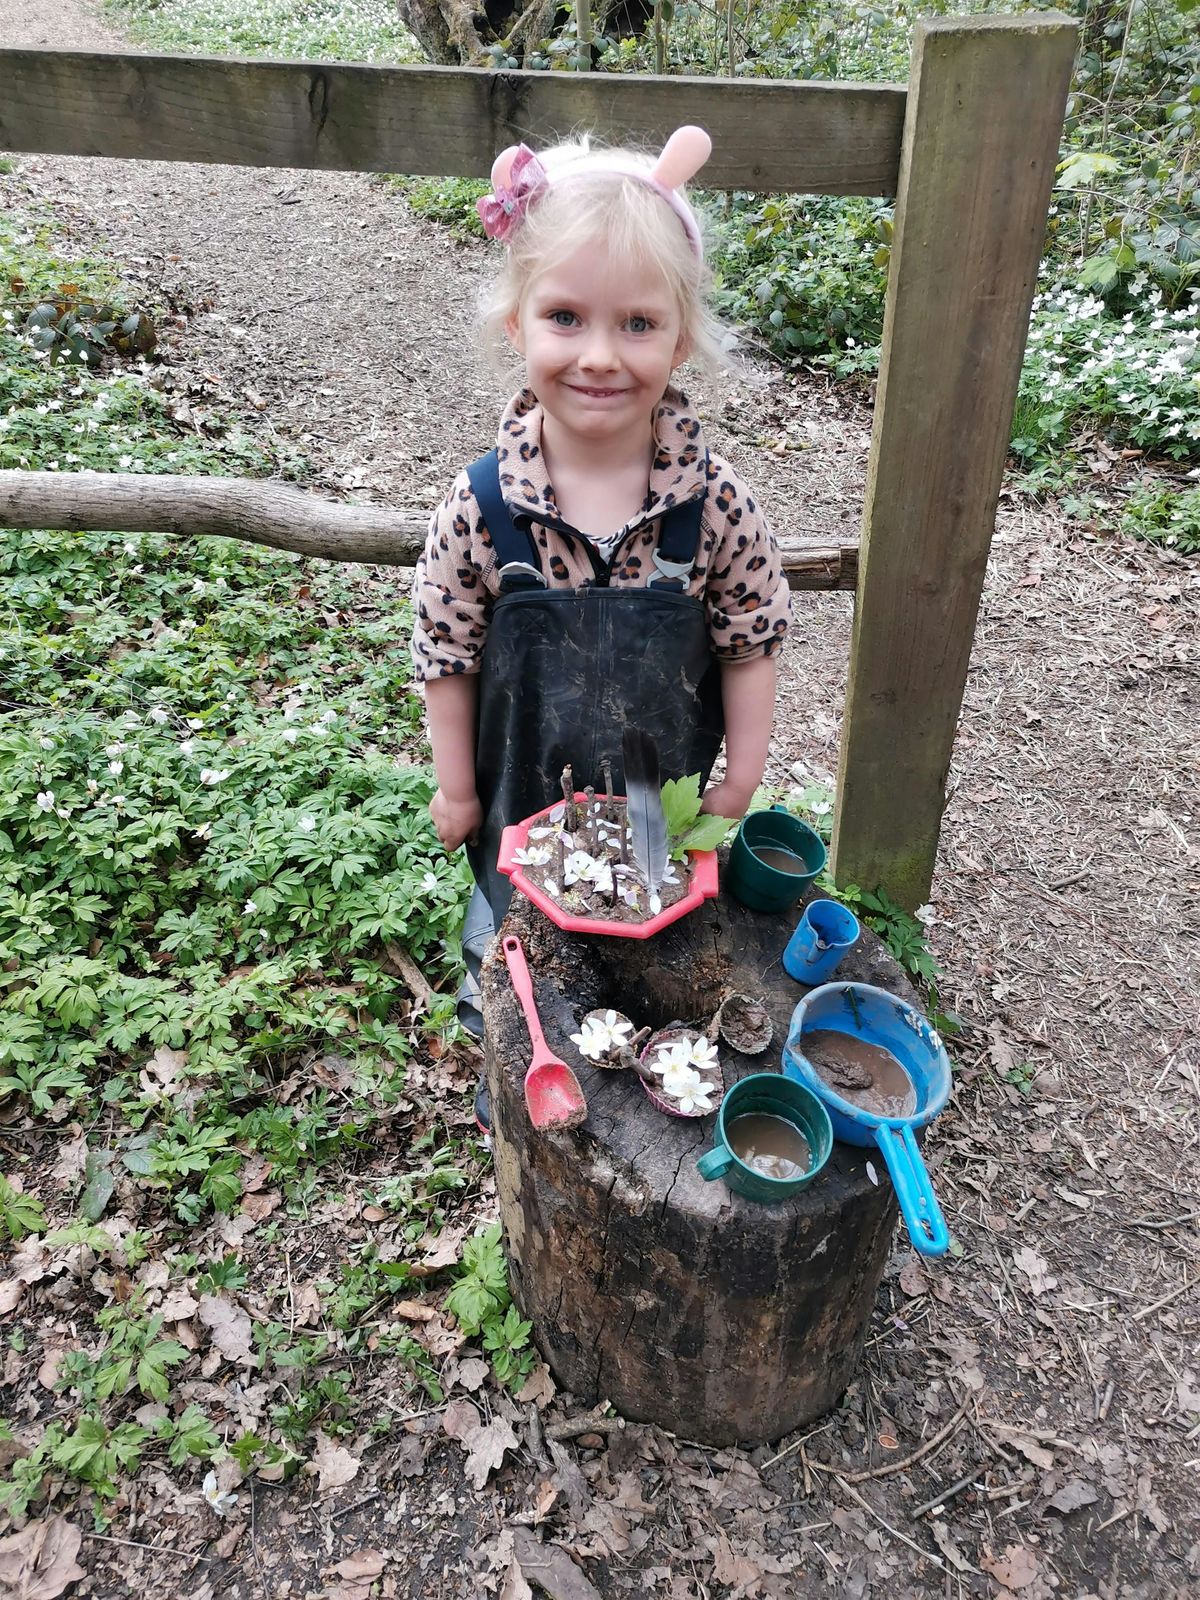 Twigglets free  woodland stay and play session for 0-4 yrs